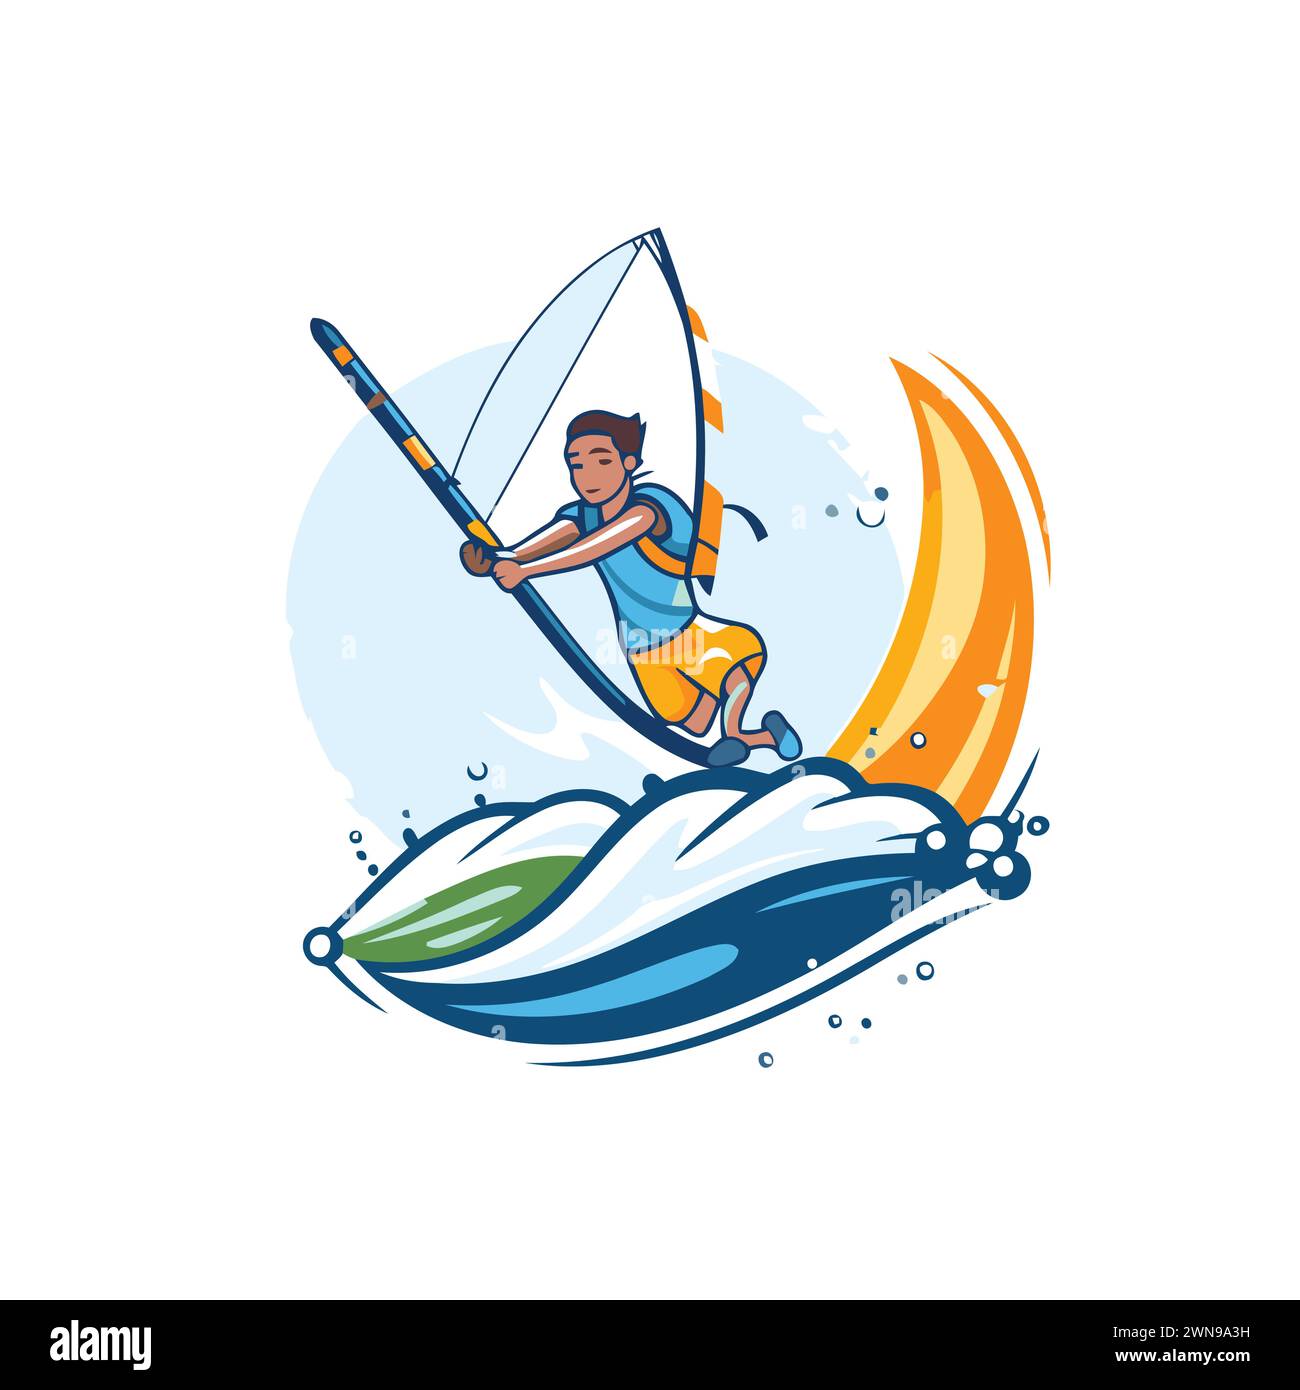 Windsurf icon. Vector illustration of a man surfing on the moon. Stock Vector